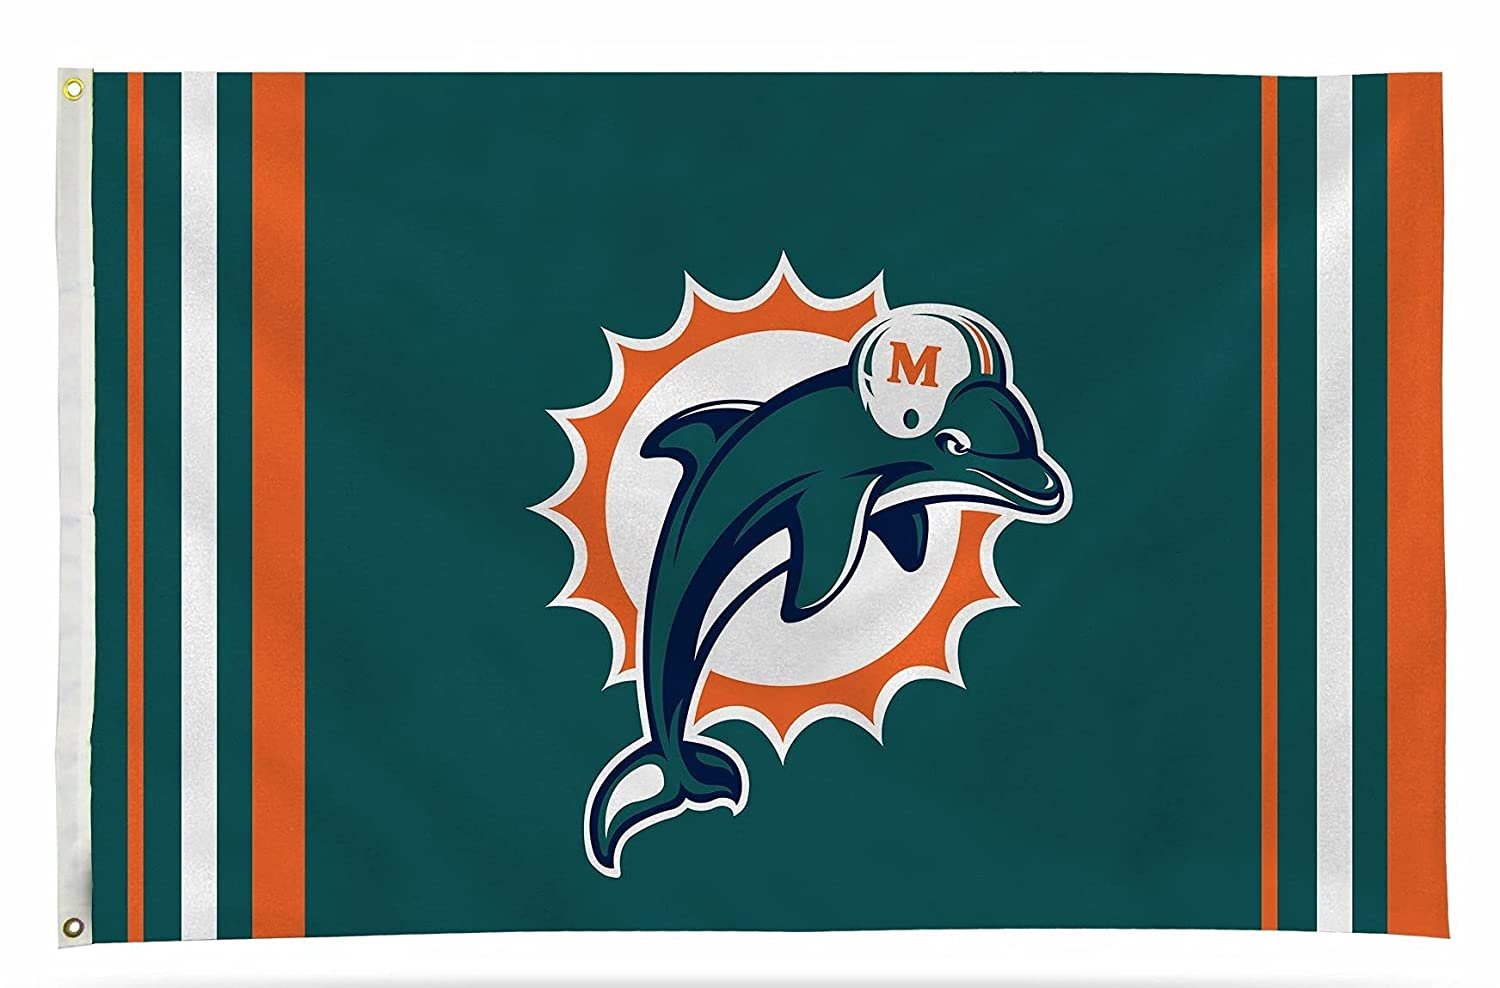 Miami Dolphins Premium 3x5 Feet Flag Banner, Retro Logo, Metal Grommets, Outdoor Indoor, Single Sided